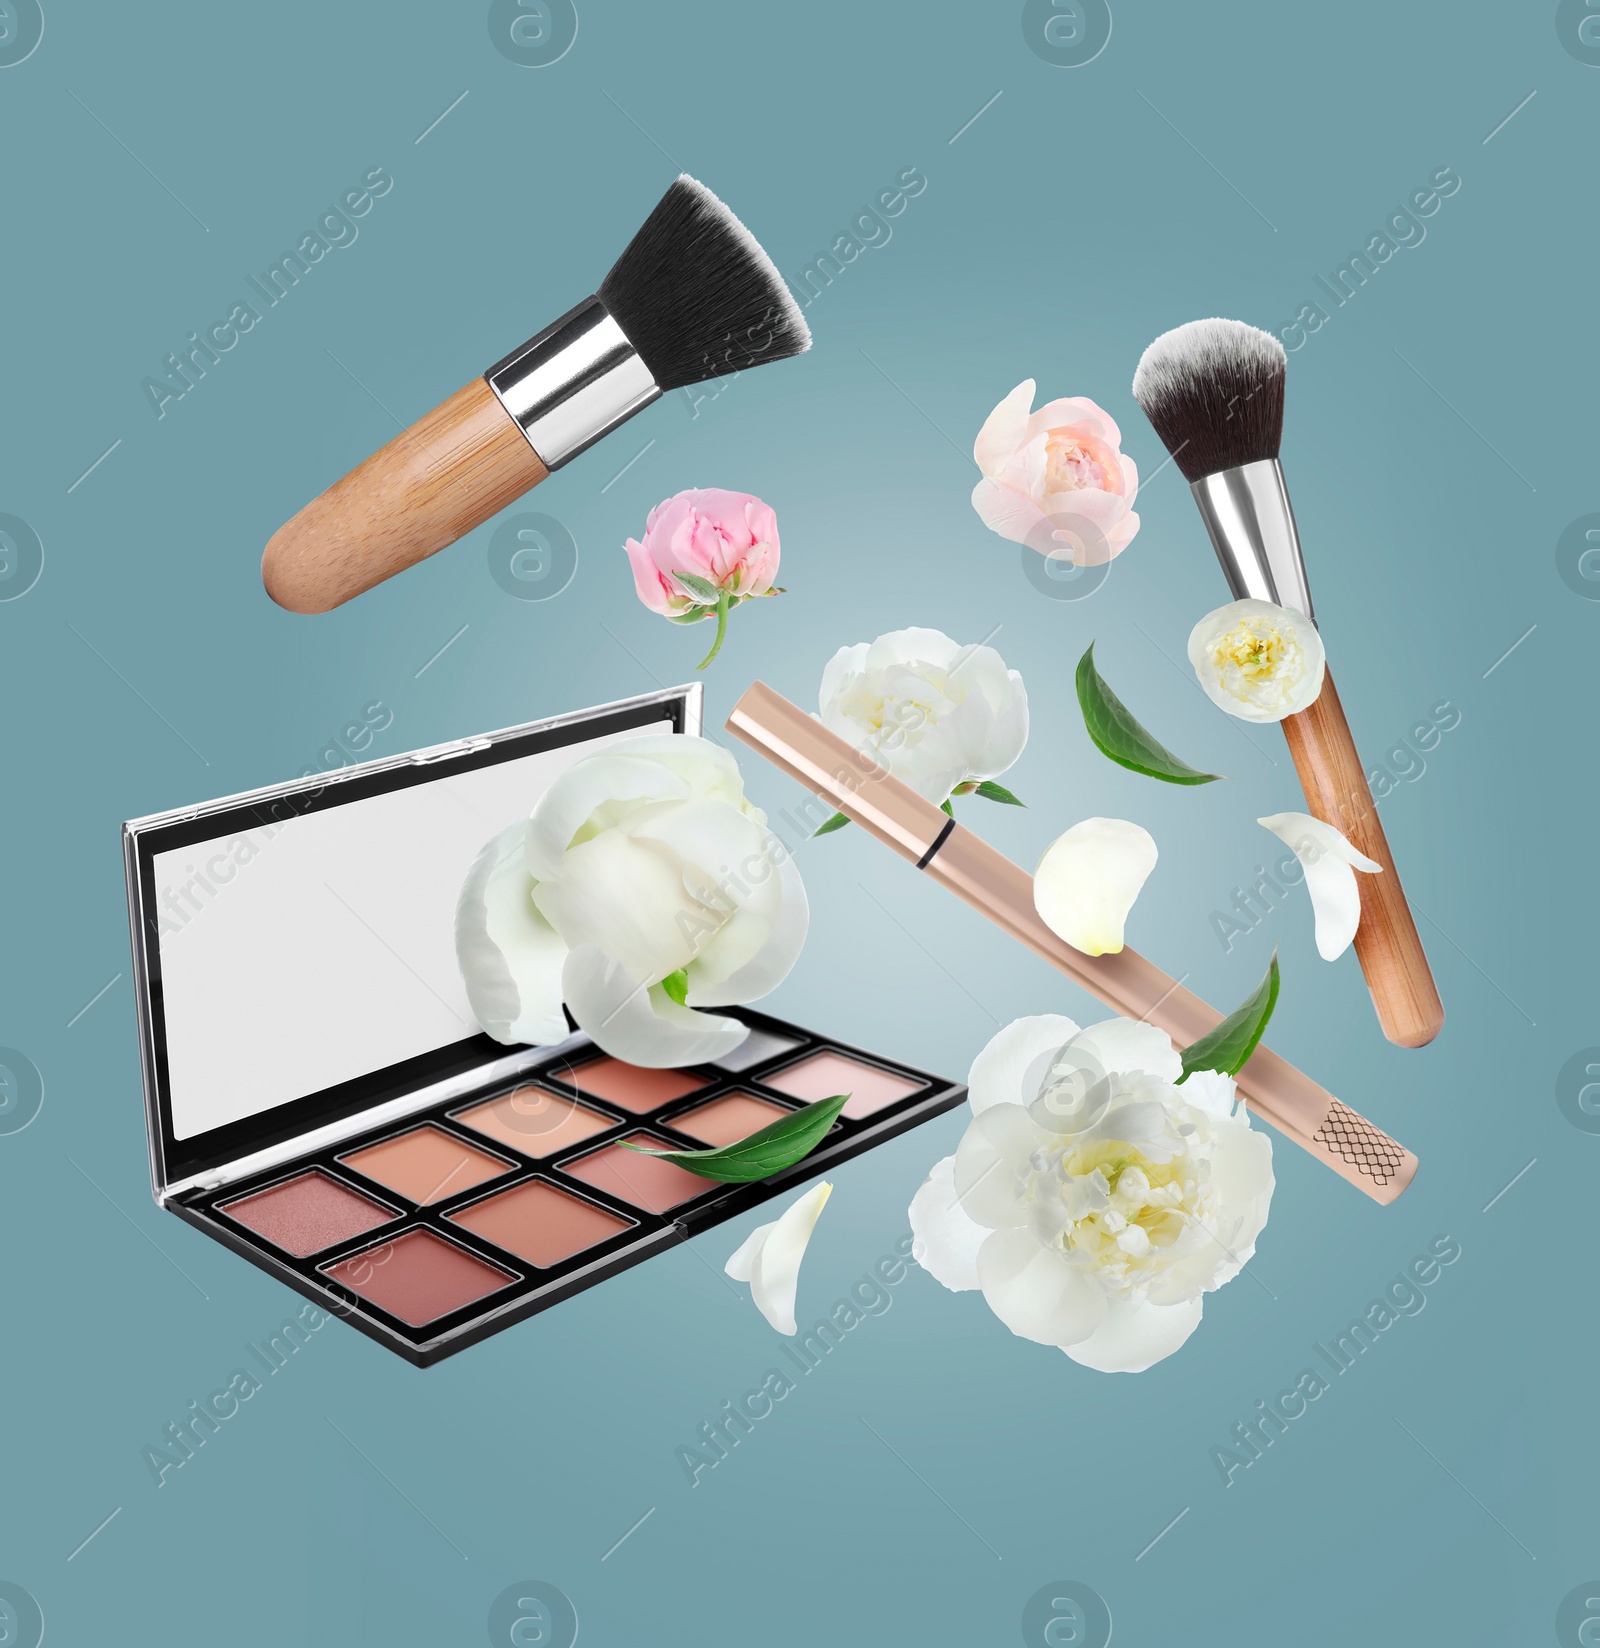 Image of Spring flowers and makeup products in air on background